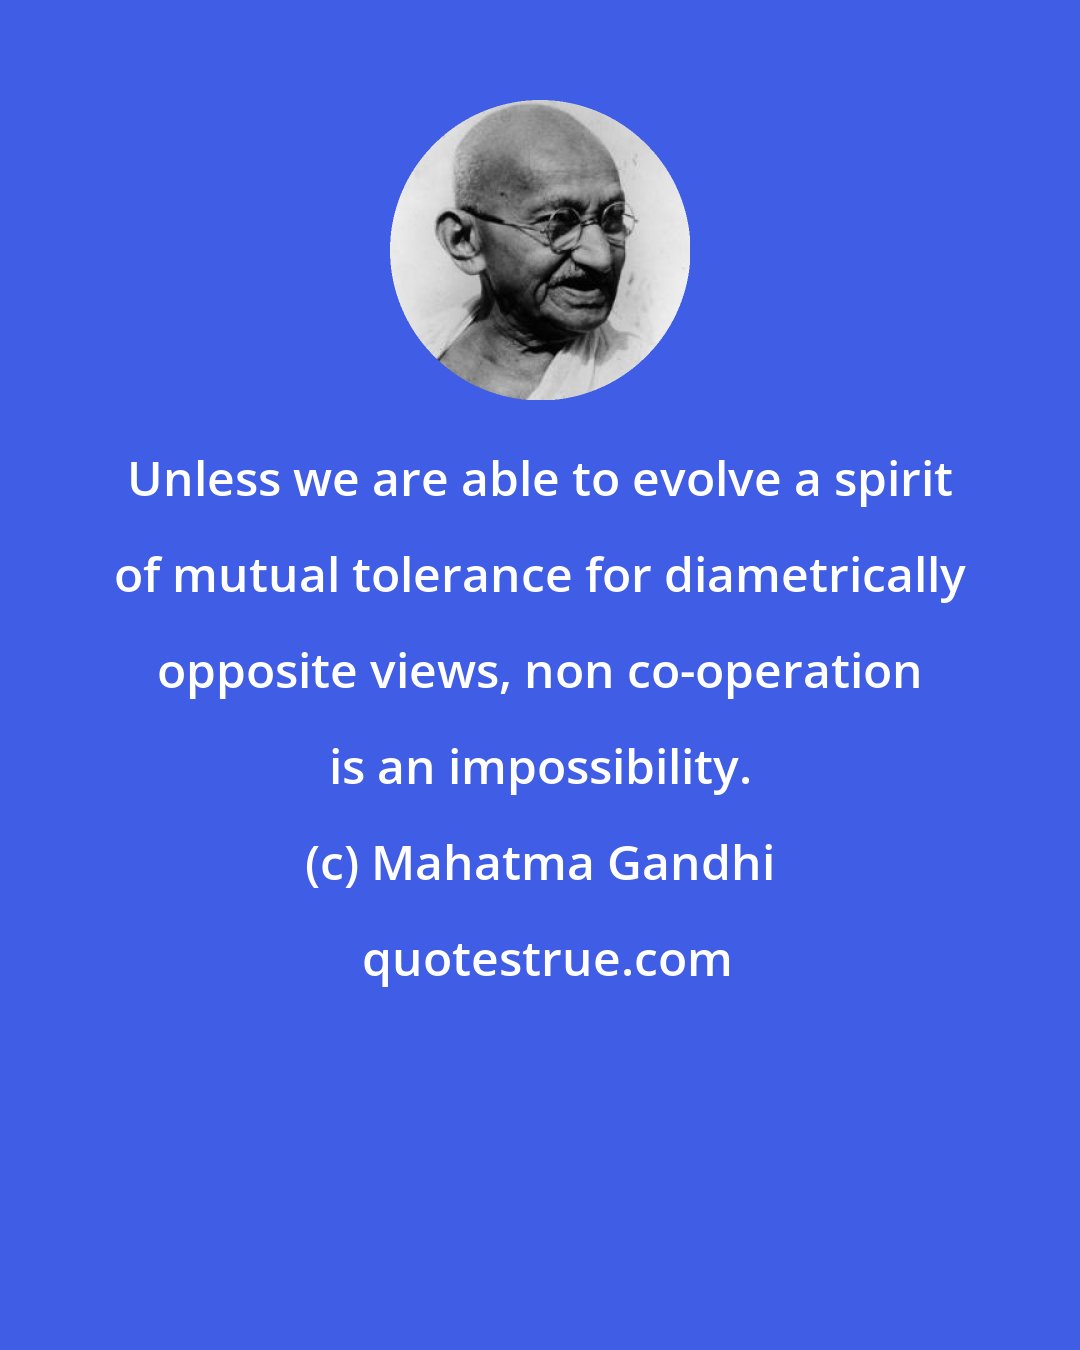 Mahatma Gandhi: Unless we are able to evolve a spirit of mutual tolerance for diametrically opposite views, non co-operation is an impossibility.